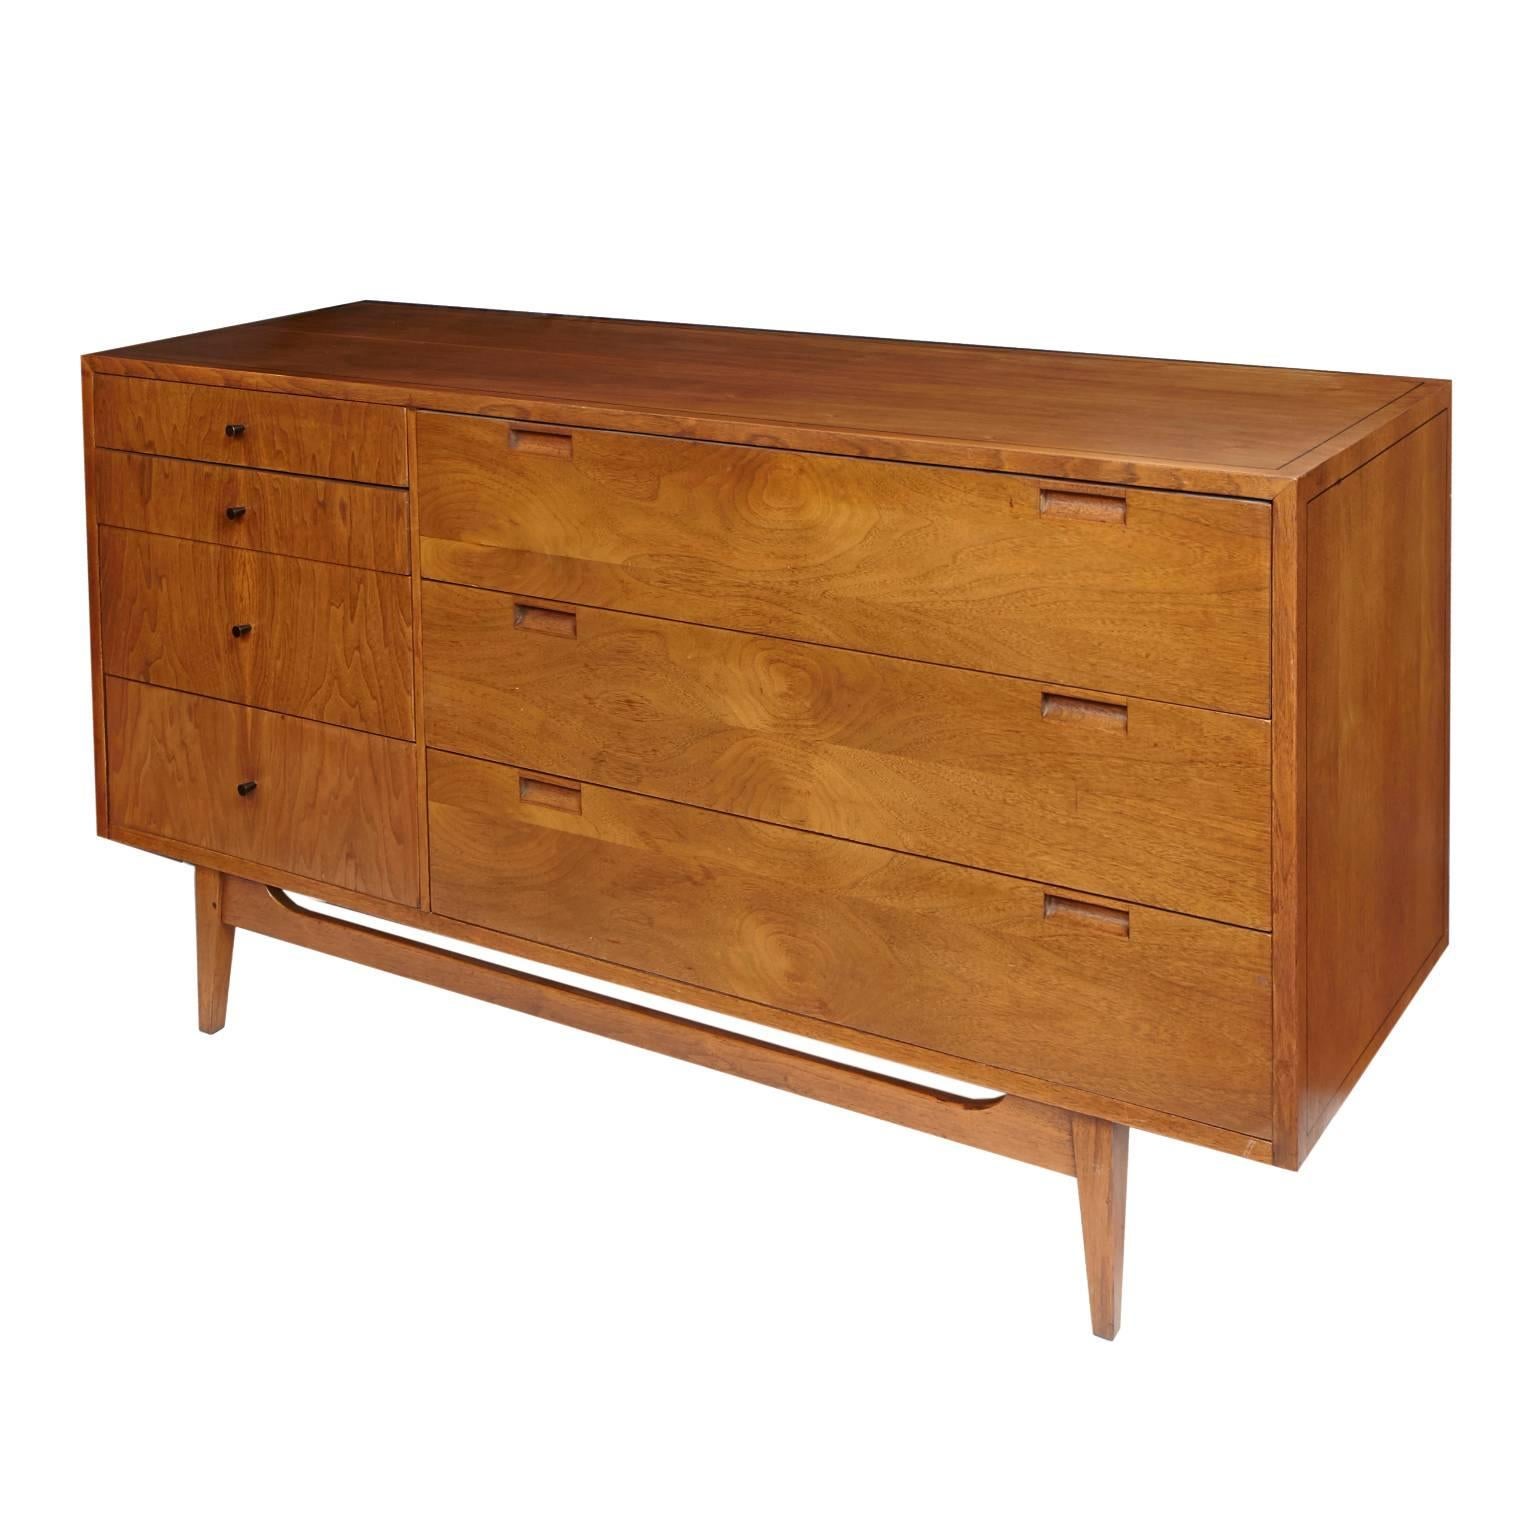 Attractive American of Martinsville seven-drawer dresser. Three large drawers on the right, with a divider in the top drawer. Four small drawers on the left. Very versatile piece. Lightly refinished,
ready to use. Also offered in a separate listing